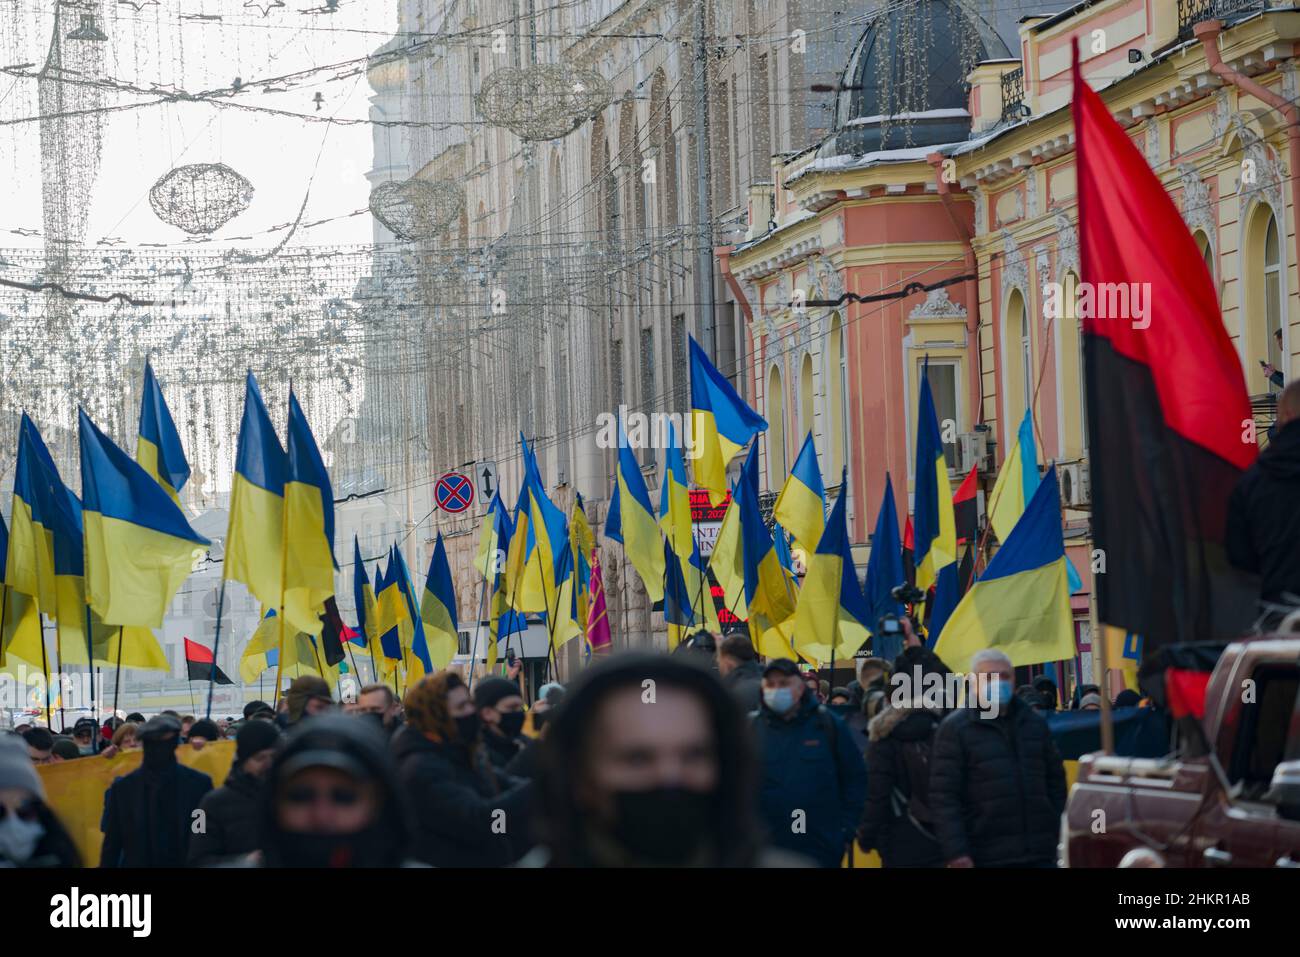 Manifestation of the unity of Ukraine, in face of troops concentration for  military aggression of Russia. Kharkiv, Ukraine Stock Photo